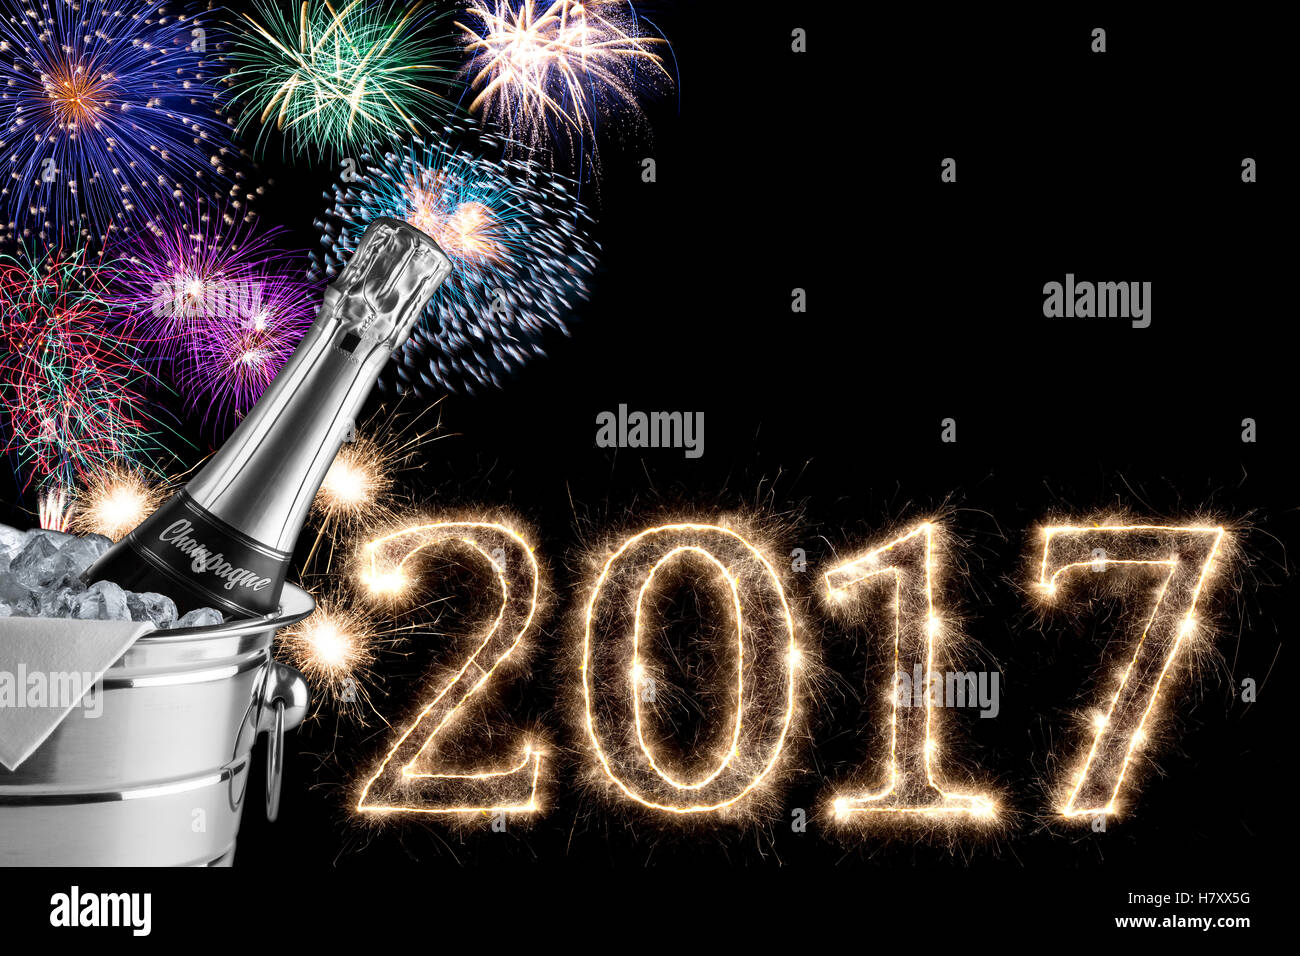 2017 colorful fireworks champagne bottle and cooler in the dark night sky with sparkling glowing number font lettering Stock Photo